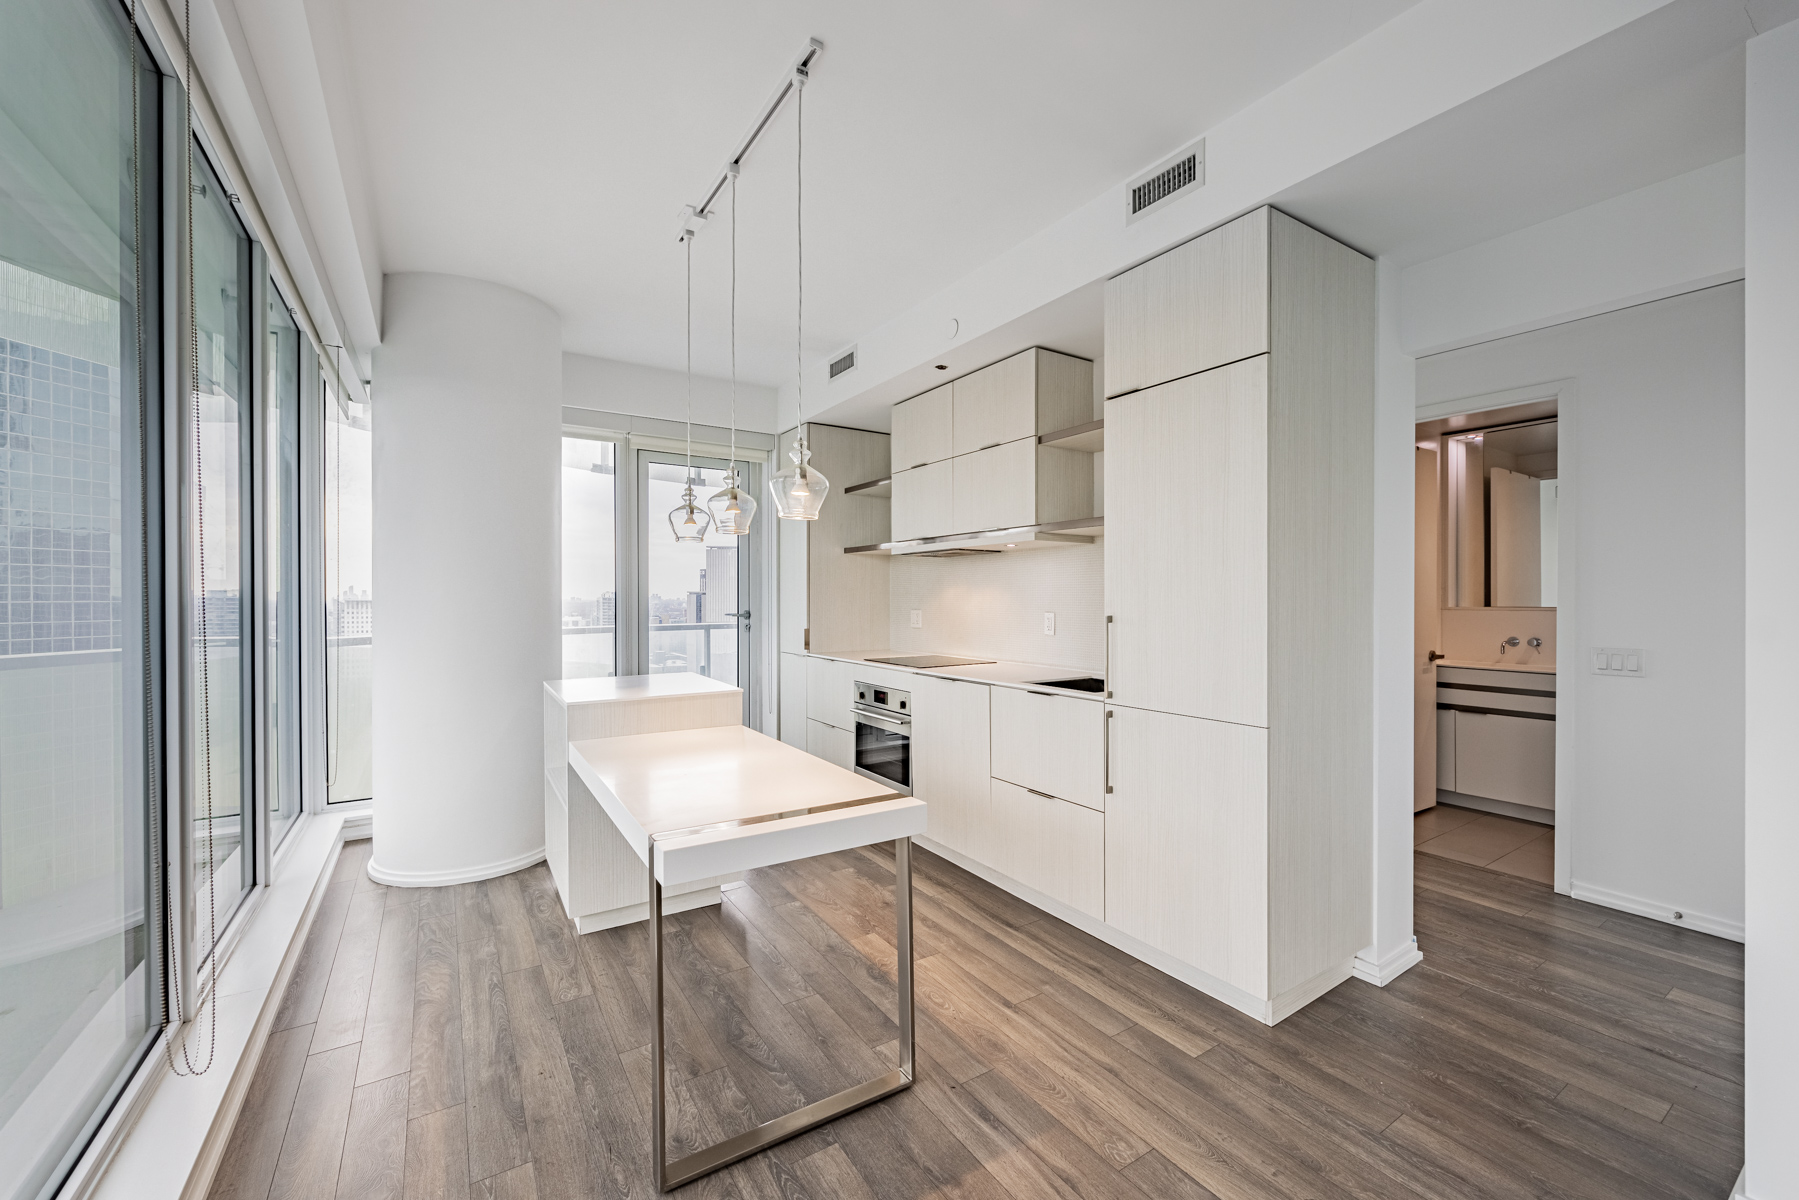 197 Yonge St Unit 2209 kitchen with light-coloured wood cabinets, laminate floors and pendant lights.